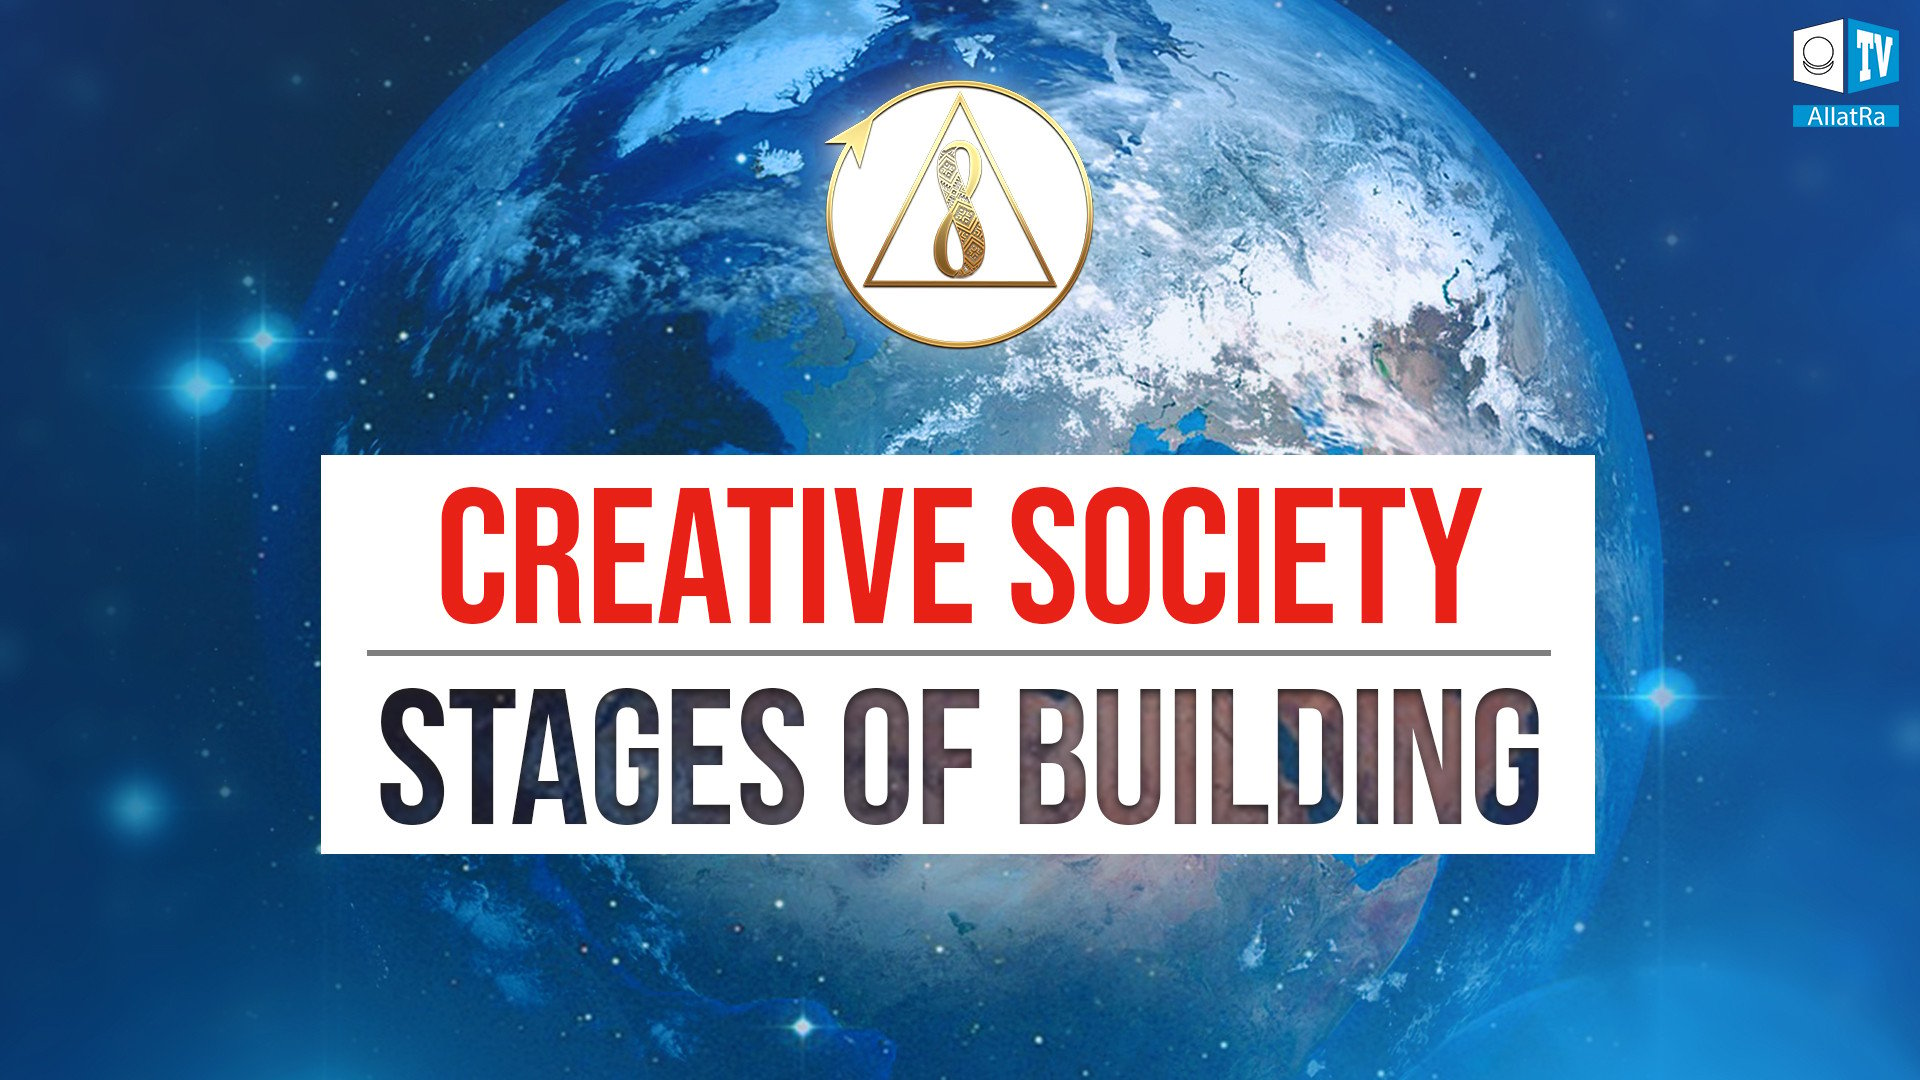 Stages of building Creative Society. Step by step. Excerpt from the conference UNITED WE CAN